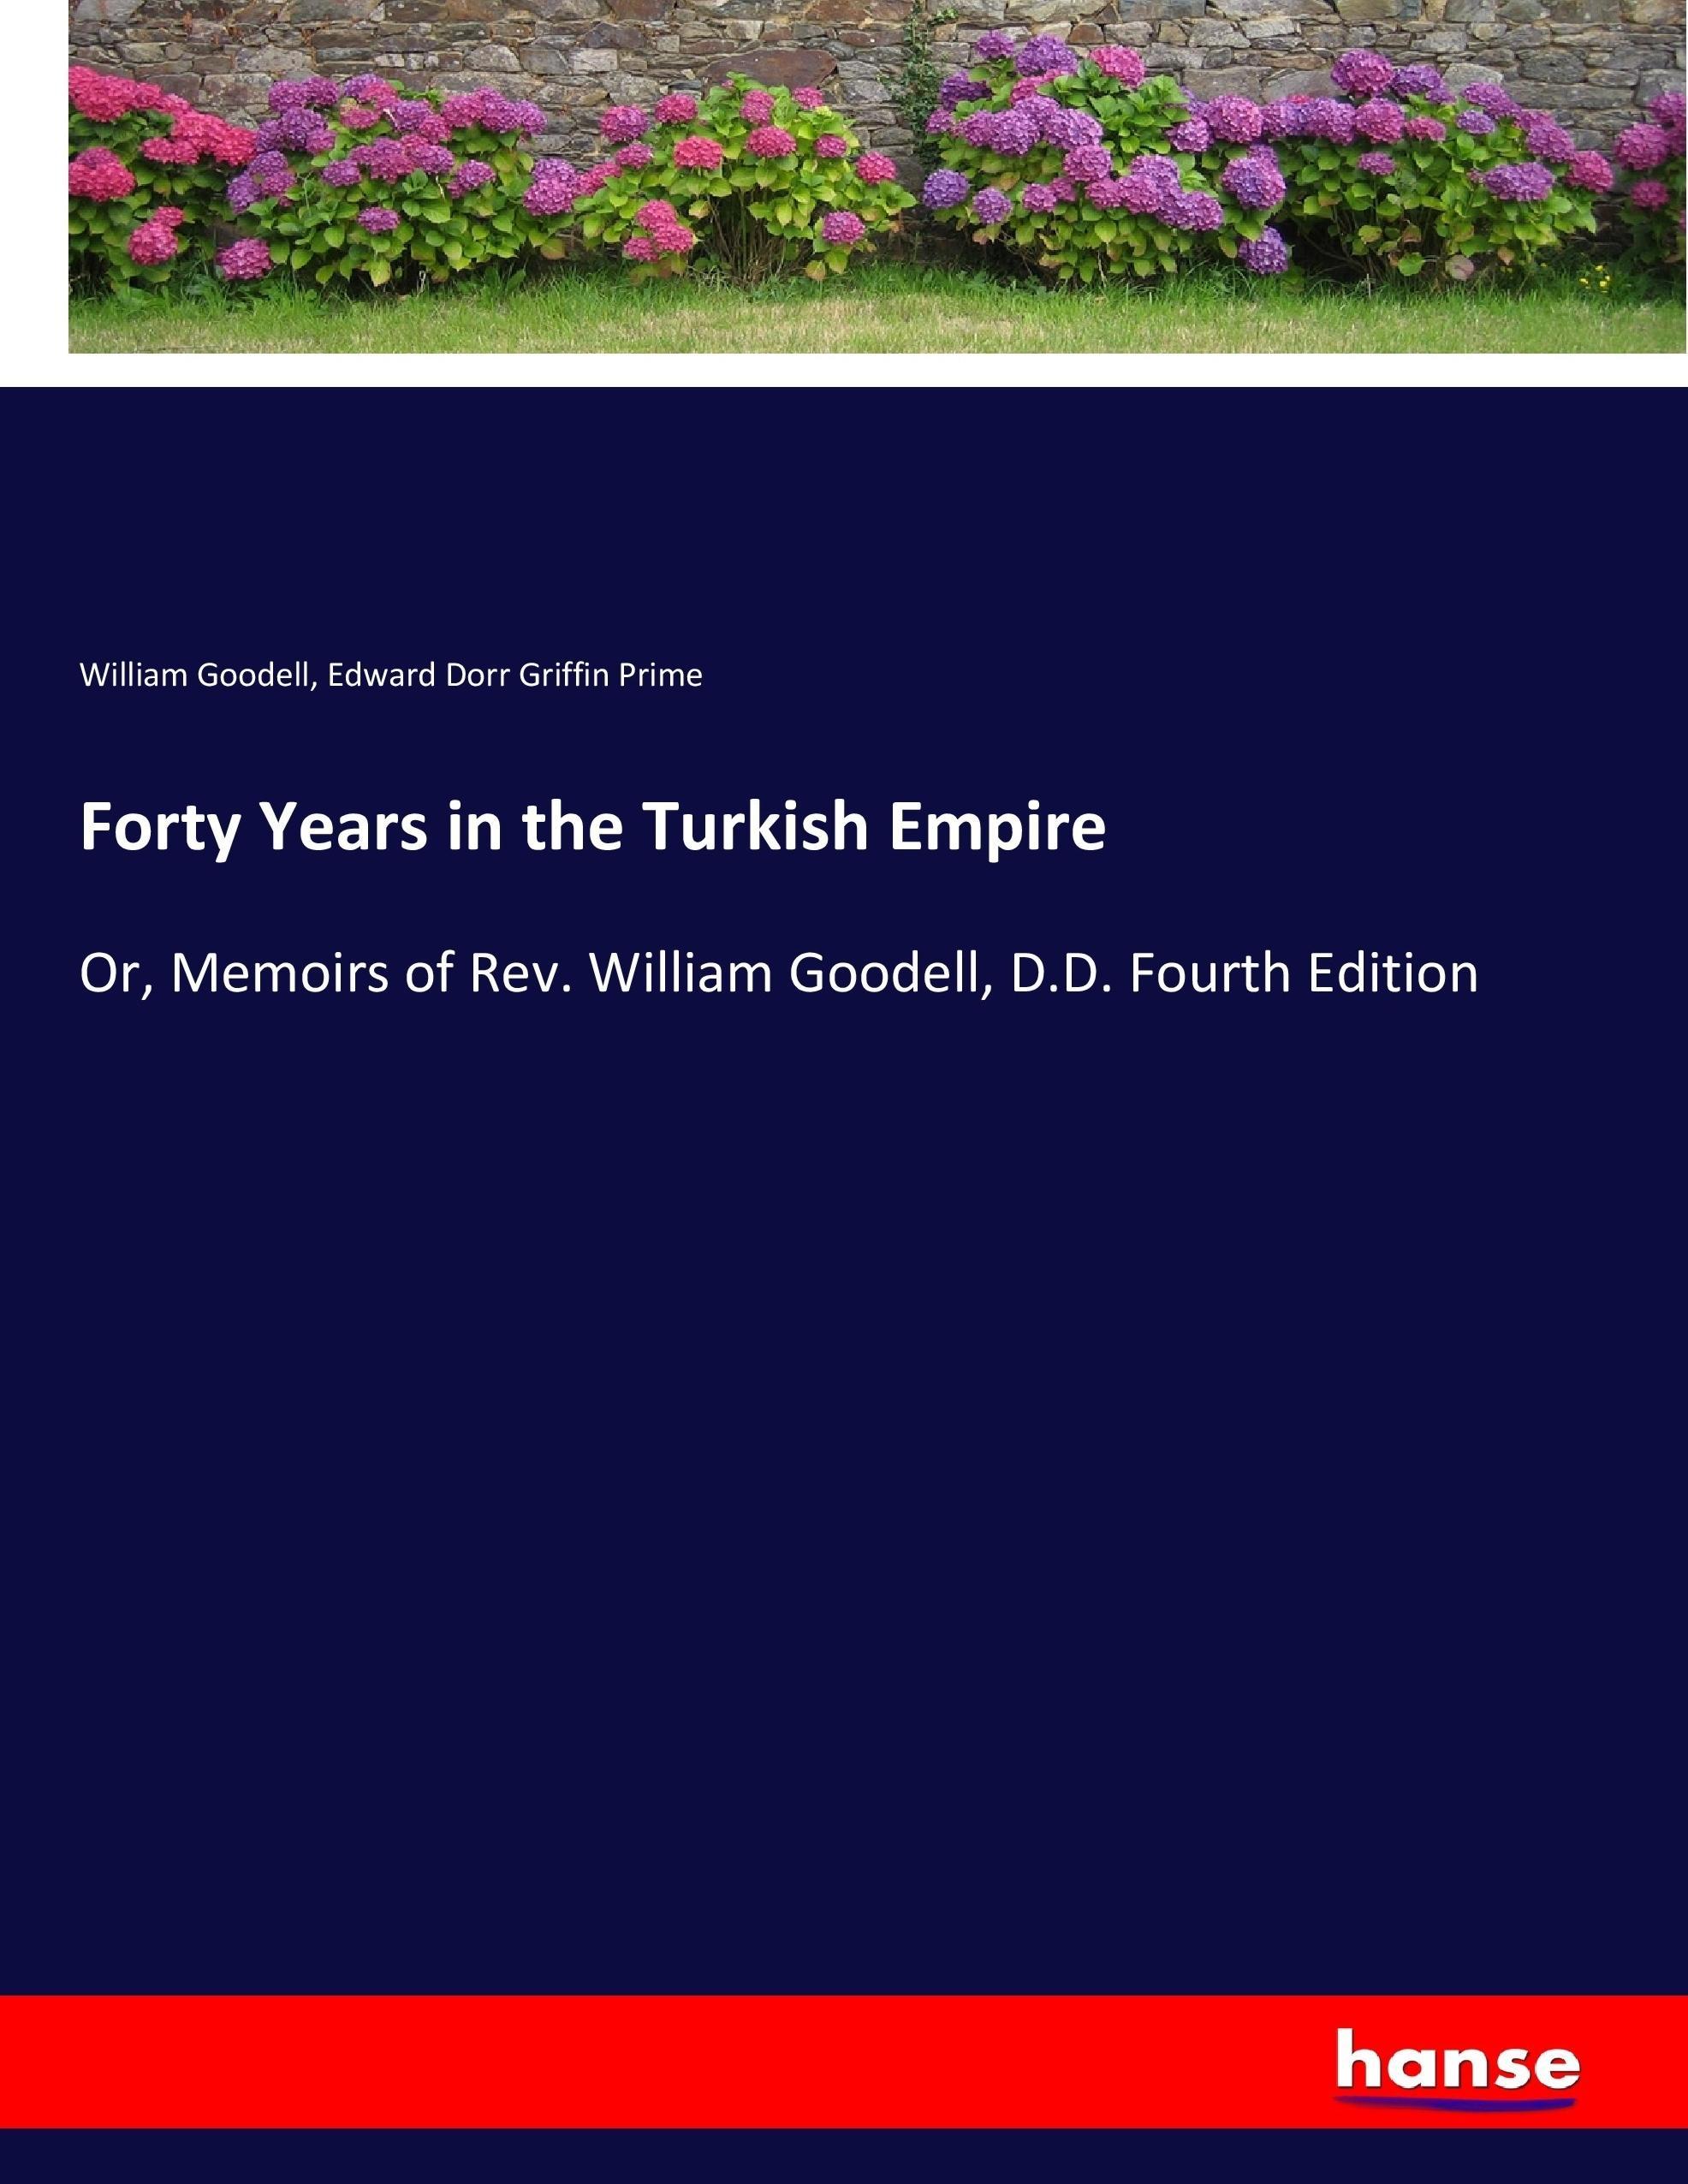 Forty Years in the Turkish Empire - Goodell, William Prime, Edward Dorr Griffin